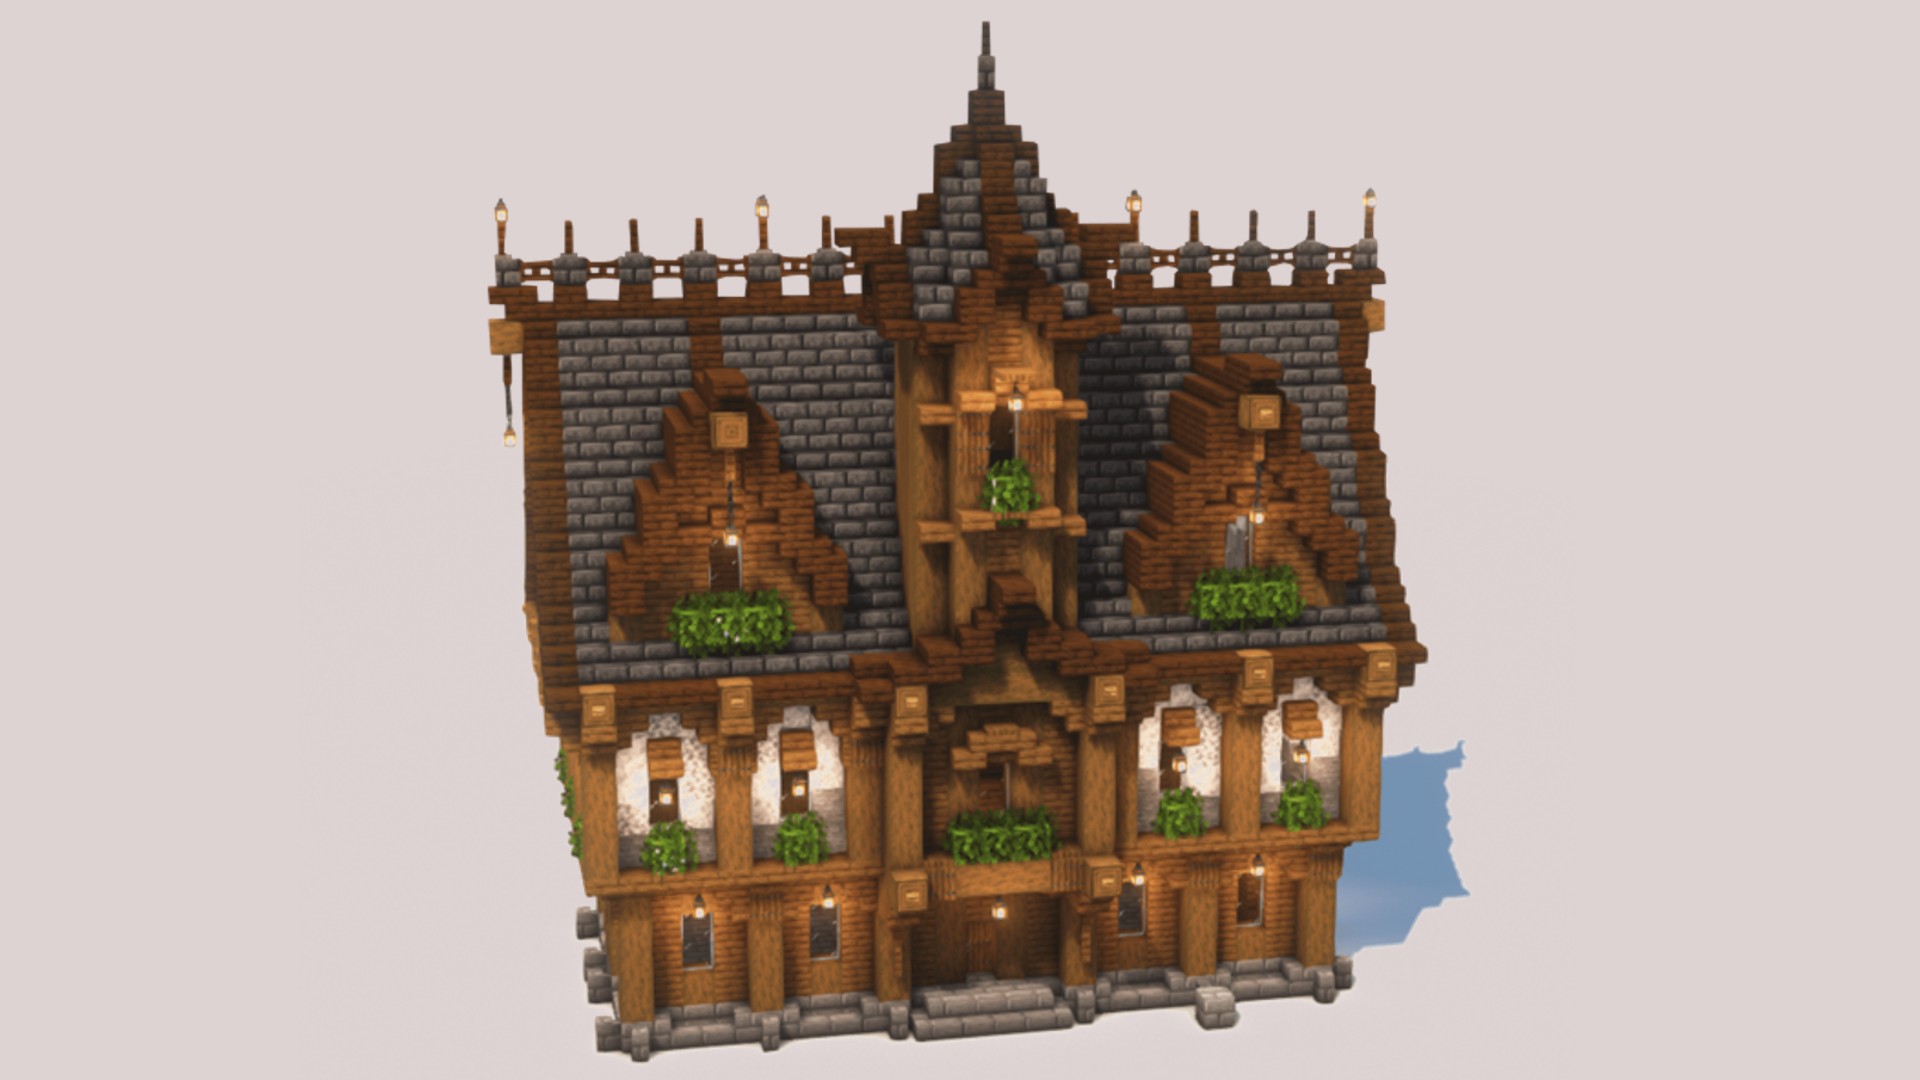 Medieval Decor Bundle - Blueprints for MineCraft Houses, Castles, Towers,  and more